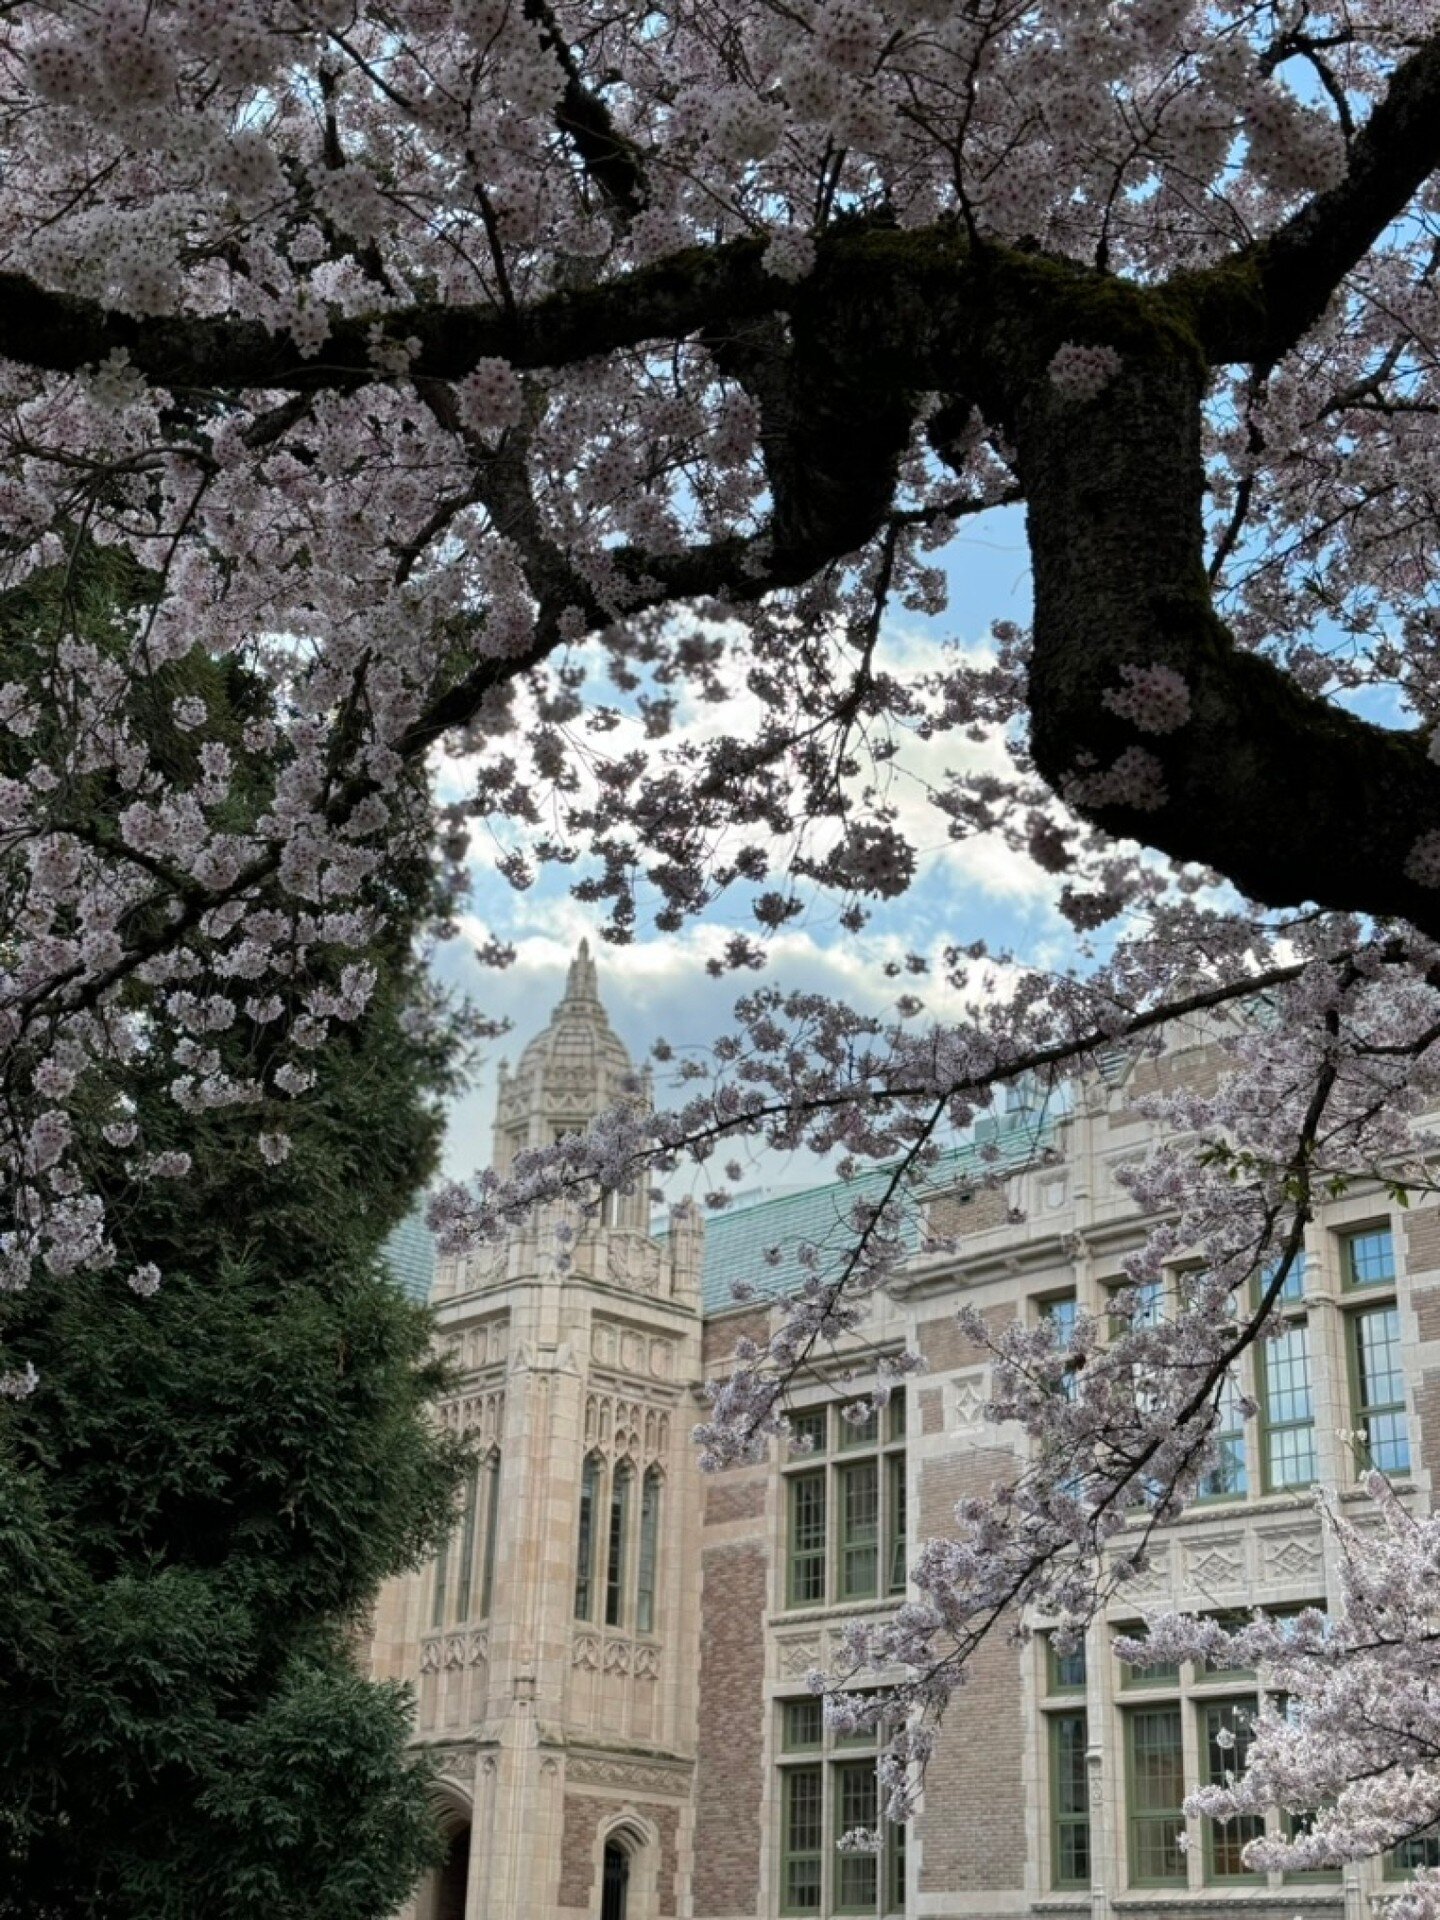 The cherry blossoms at the University of Washington last week were breathtaking! It was impossible not to feel energized and happy surrounded by the beautiful pinkness atop the old mossy trees. 🌸 #cherryblossoms #naturelover #universityofwashington 